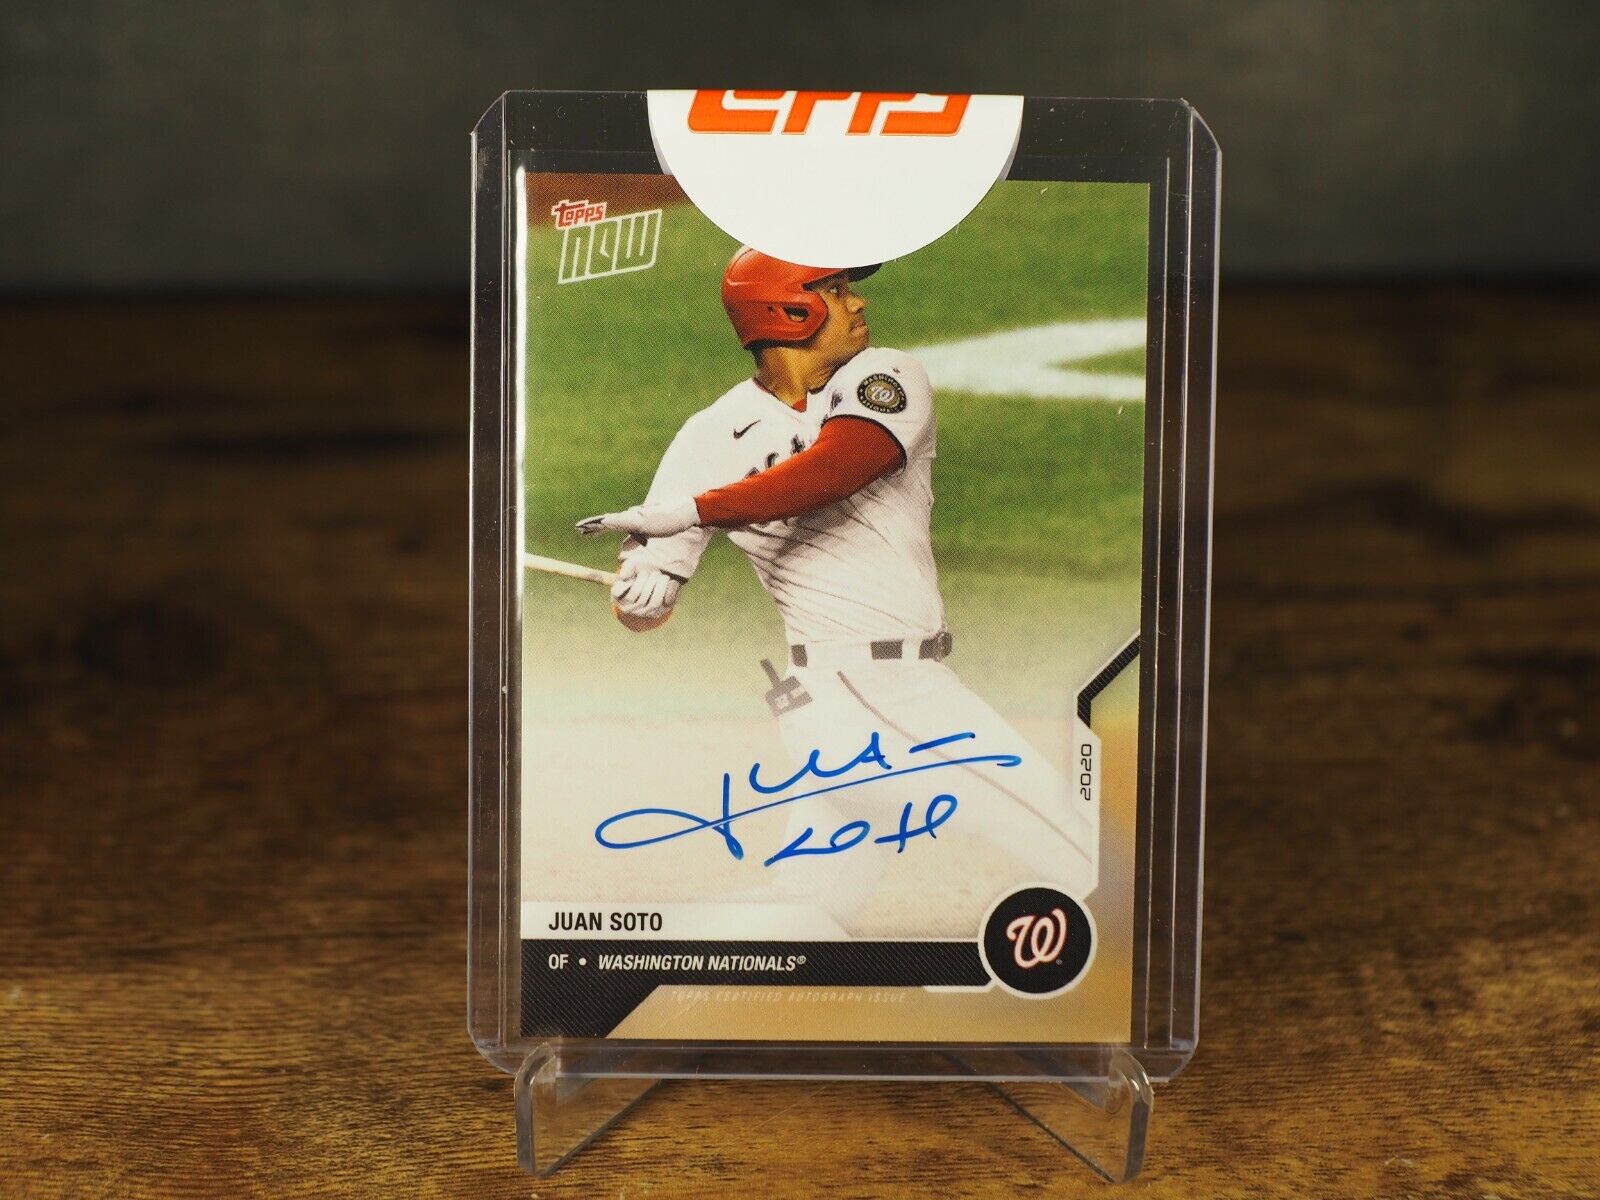 JUAN SOTO Nationals Topps Now 2020 ON CARD AUTO TOPPS EXCLUSIVE CUSTOMER SET 